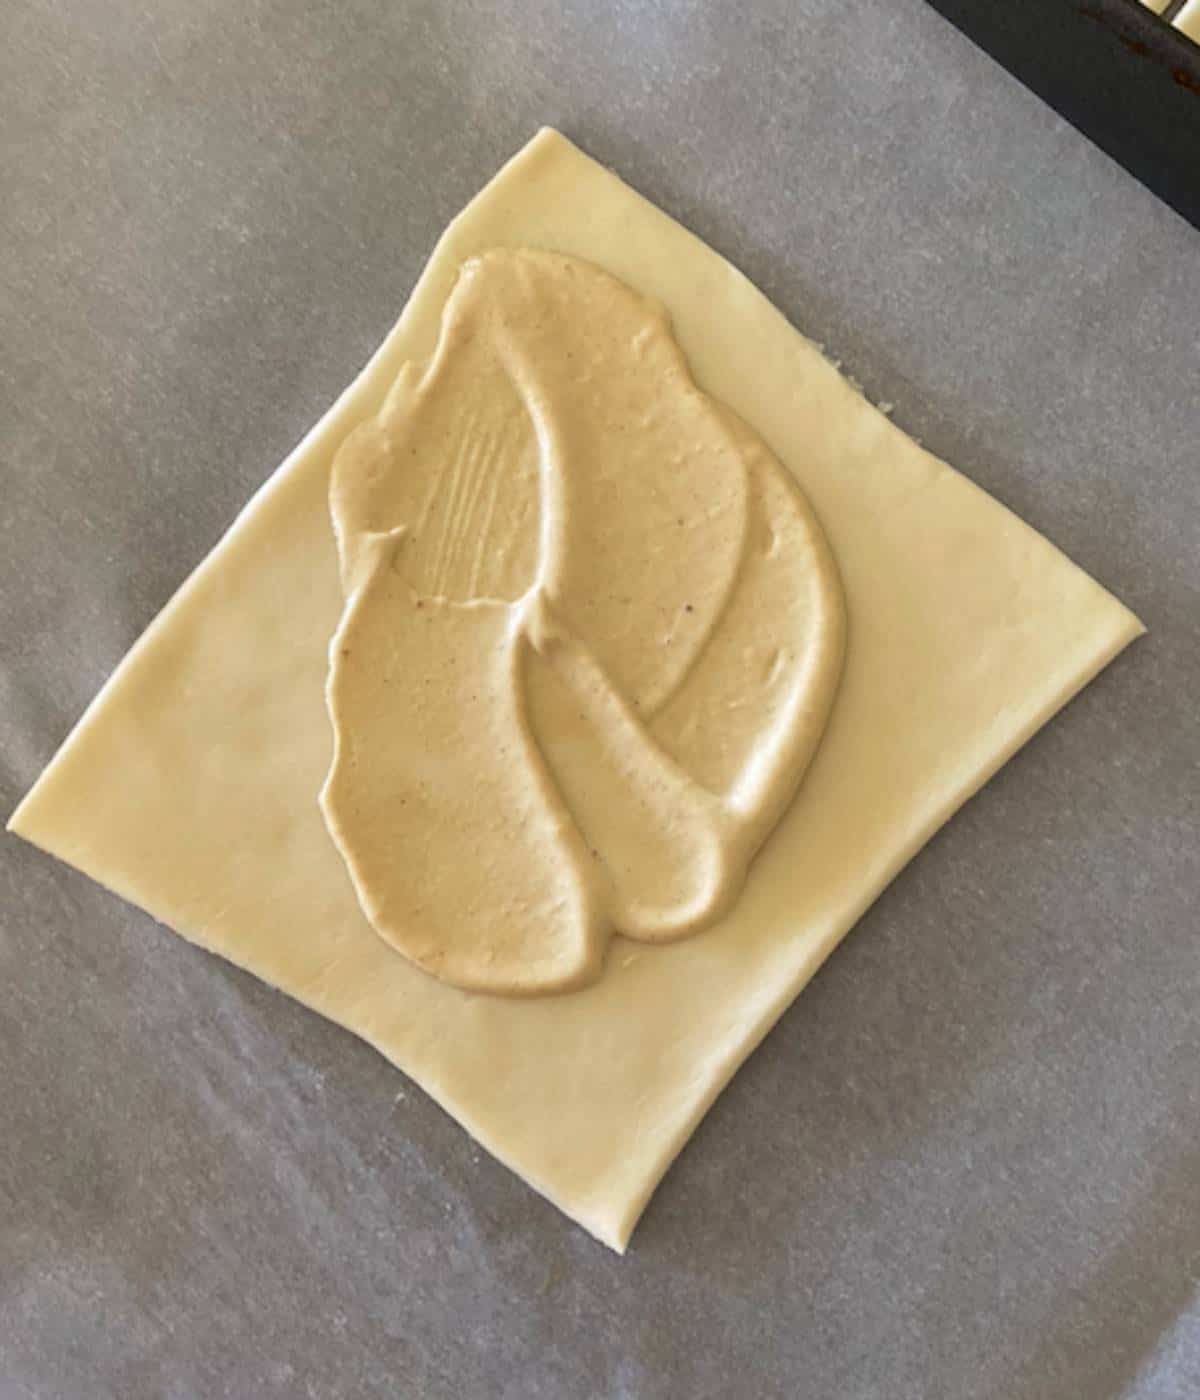 Puff pastry square with mayo mustard spread.